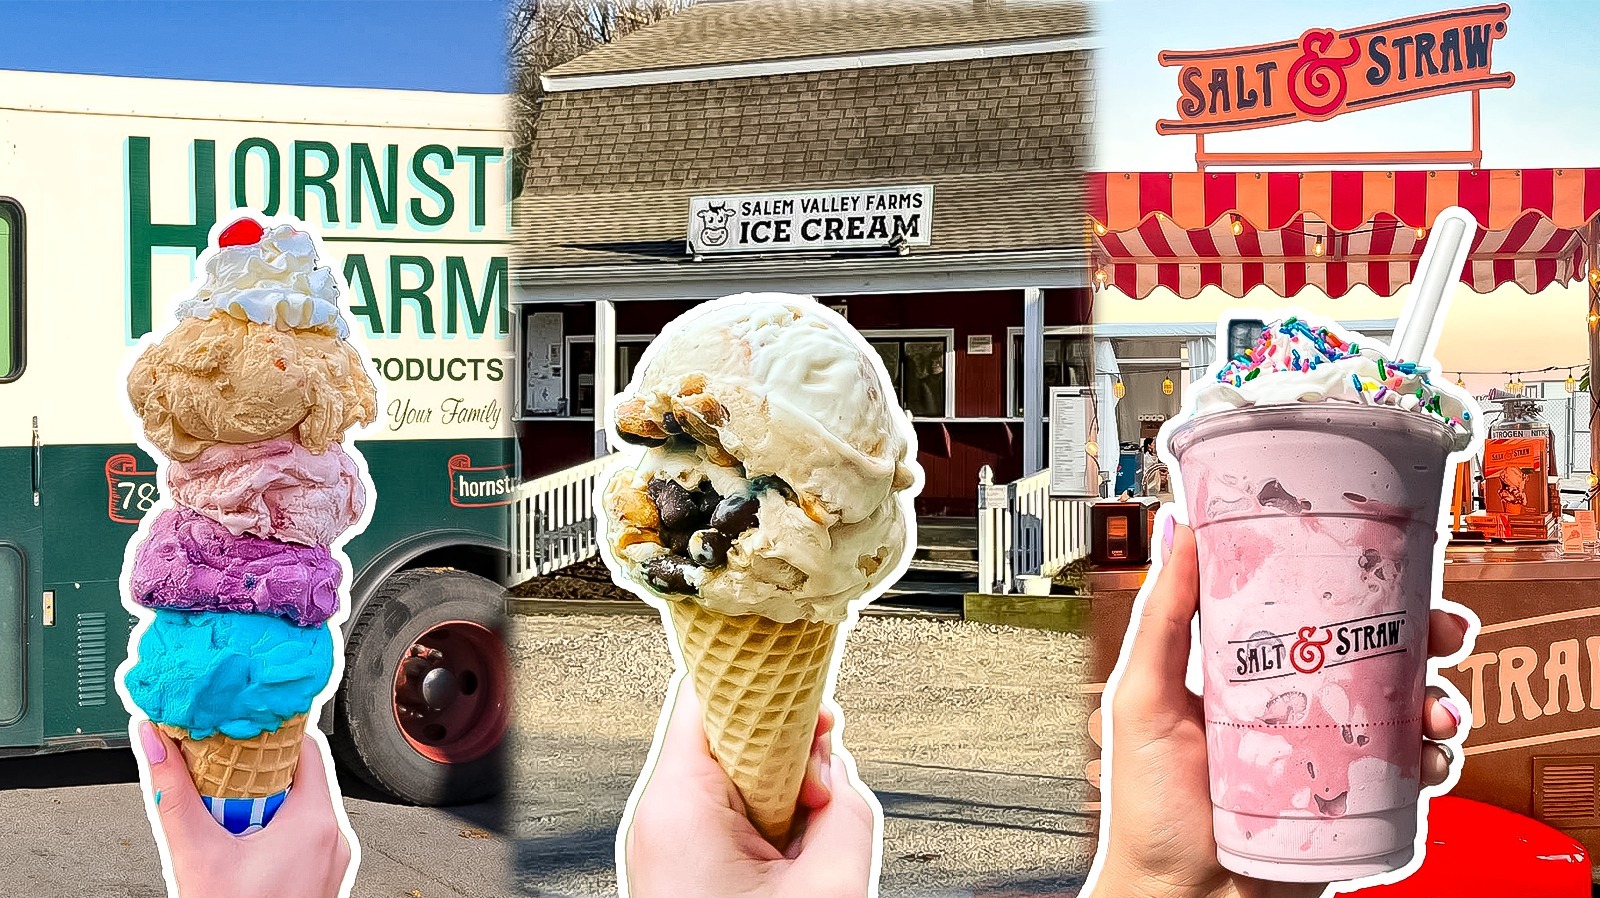 https://www.tastingtable.com/img/gallery/the-best-ice-cream-shops-in-the-us-according-to-tasting-table-staff/l-intro-1687980398.jpg